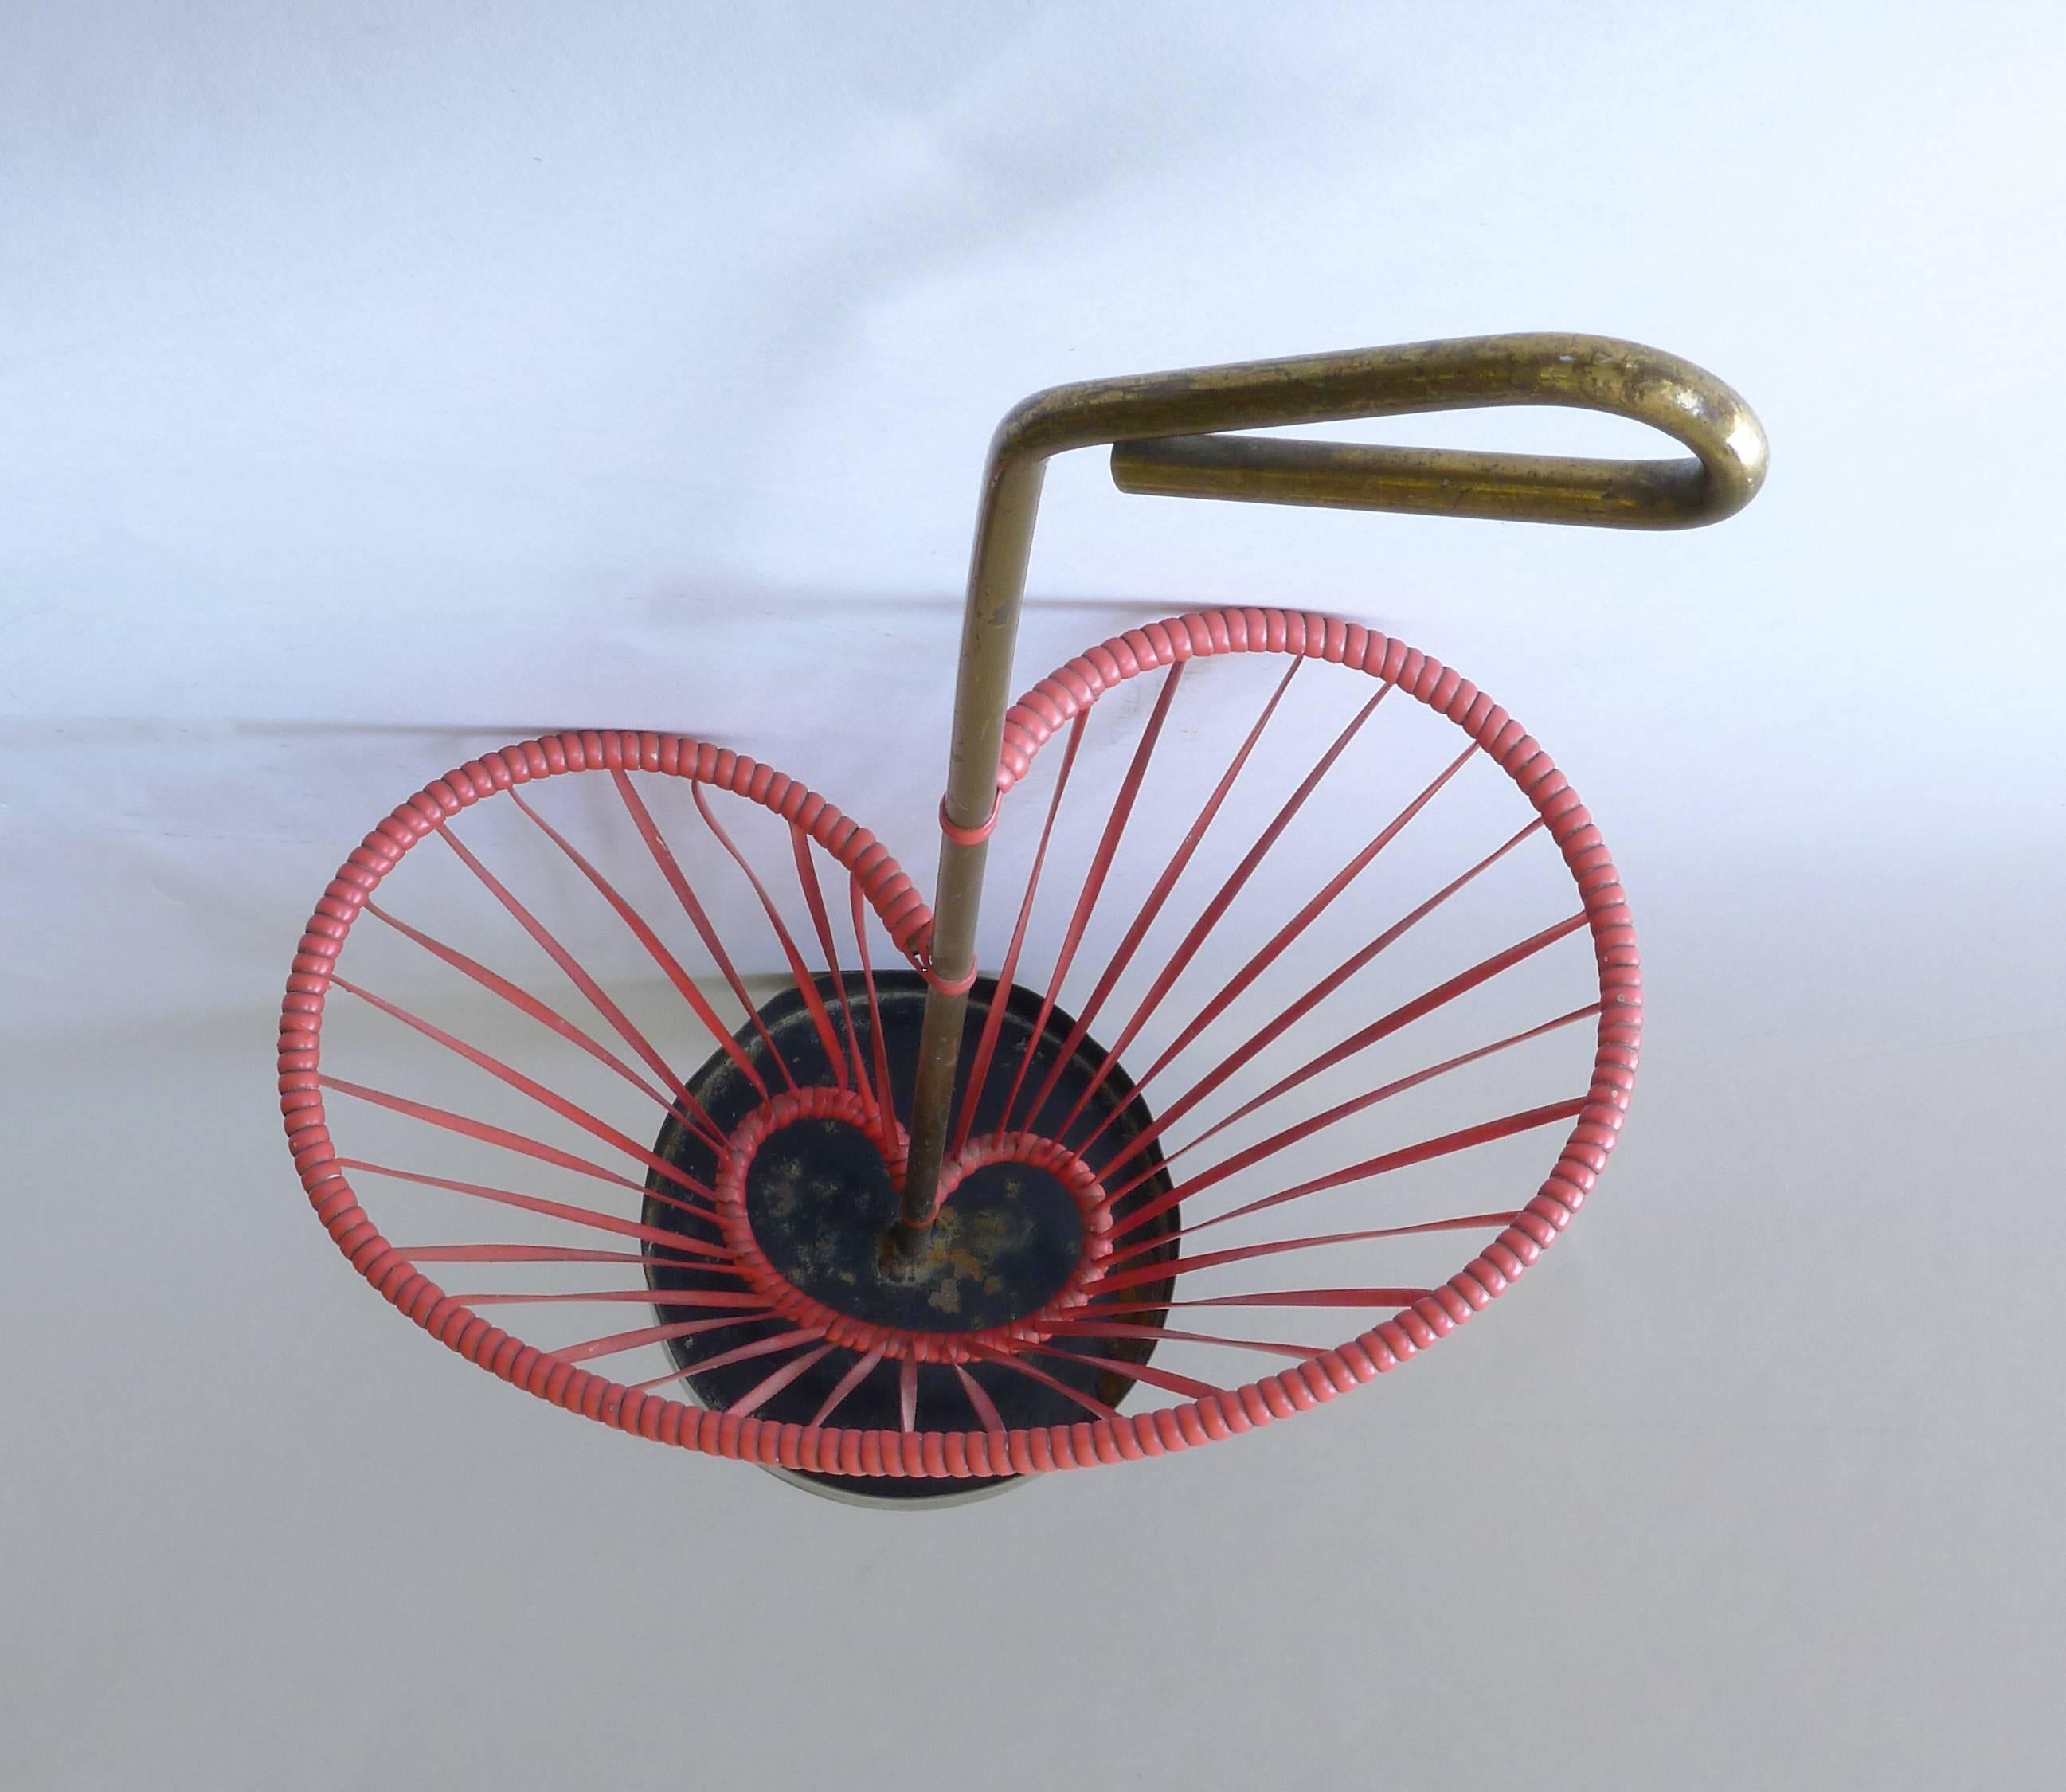 Luxus umbrella stand Aubock Era. Red rubber sting material with brass details. Purchased in Austria, but believed to be made in Sweden.

Architect, Sandy Littman of Duesenberg LTD.  and The American Glass Light Company have been making beautiful